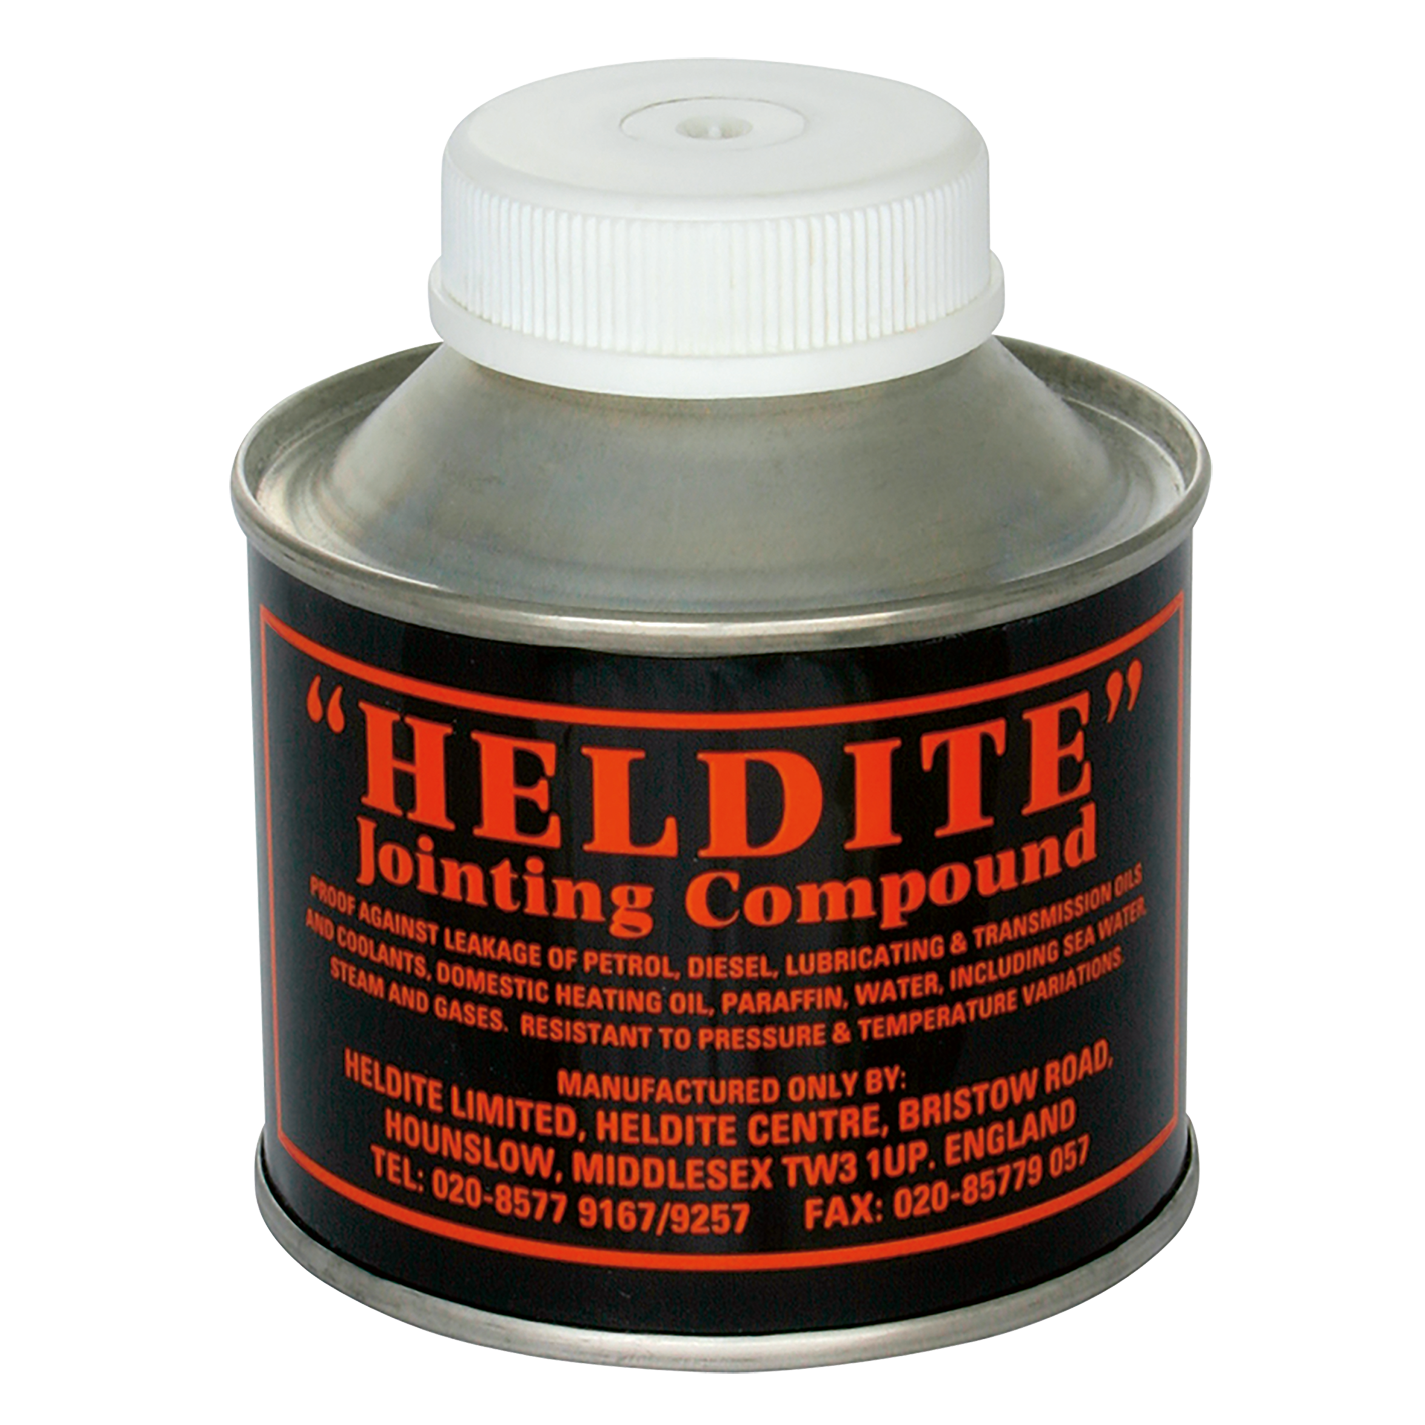 500ML TIN HELDITE JOINTING COMPOUND